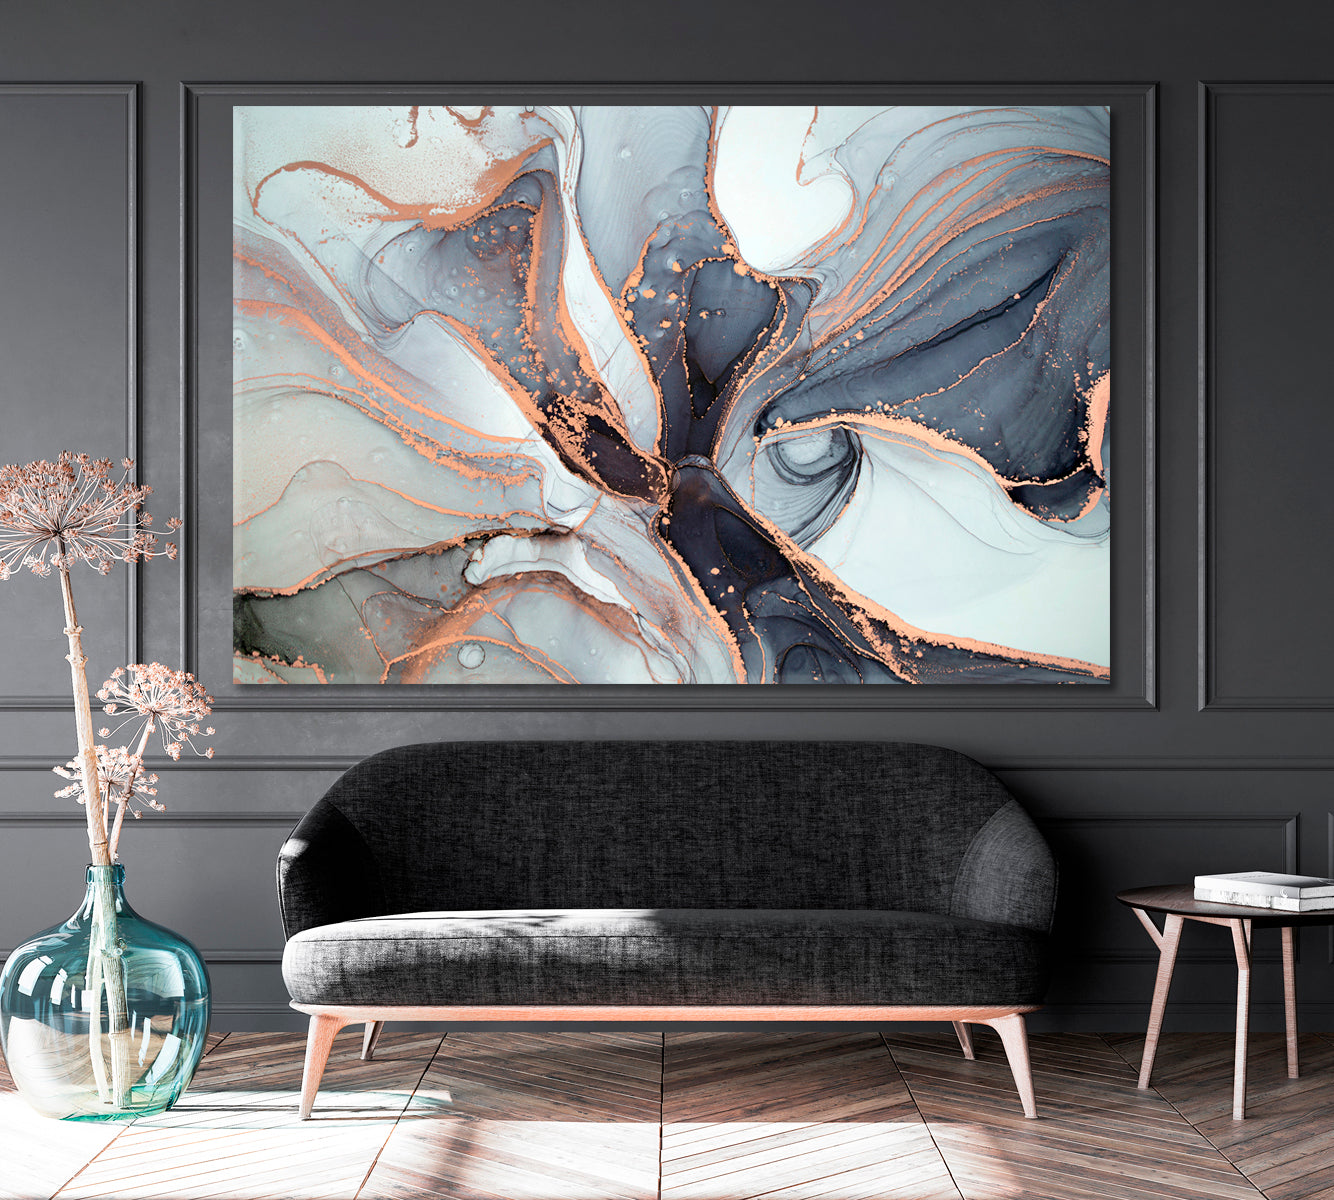 Luxury Modern Abstract Marble Ink Canvas Print ArtLexy 1 Panel 24"x16" inches 